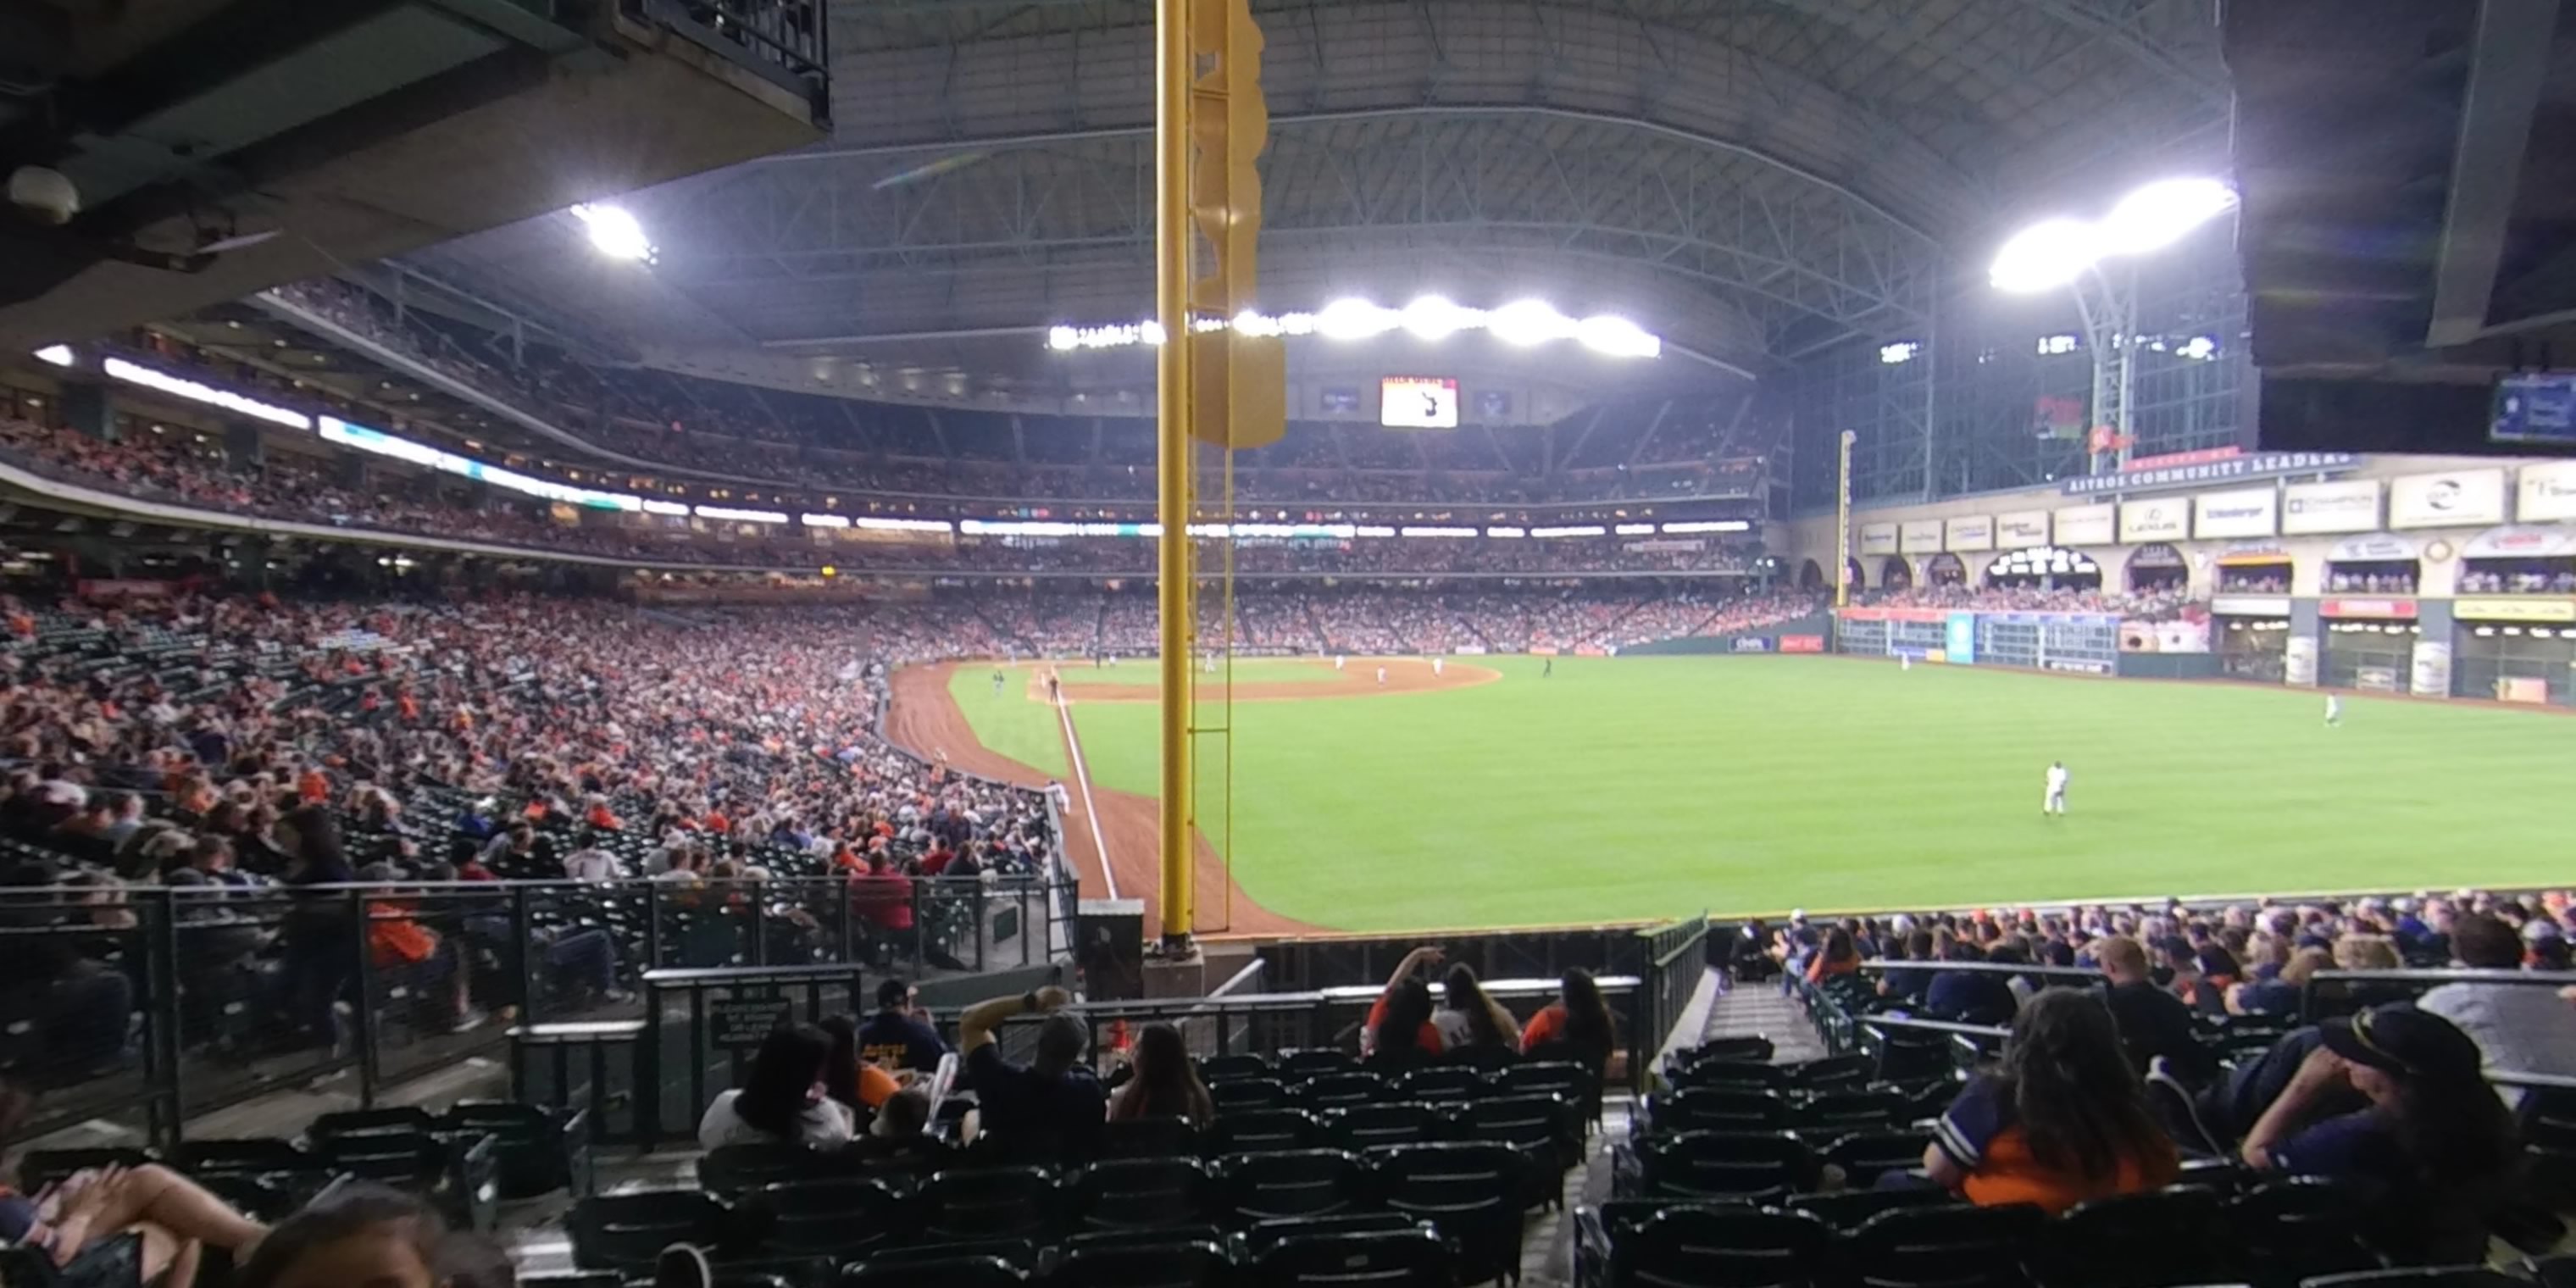 section 150 panoramic seat view  for baseball - minute maid park